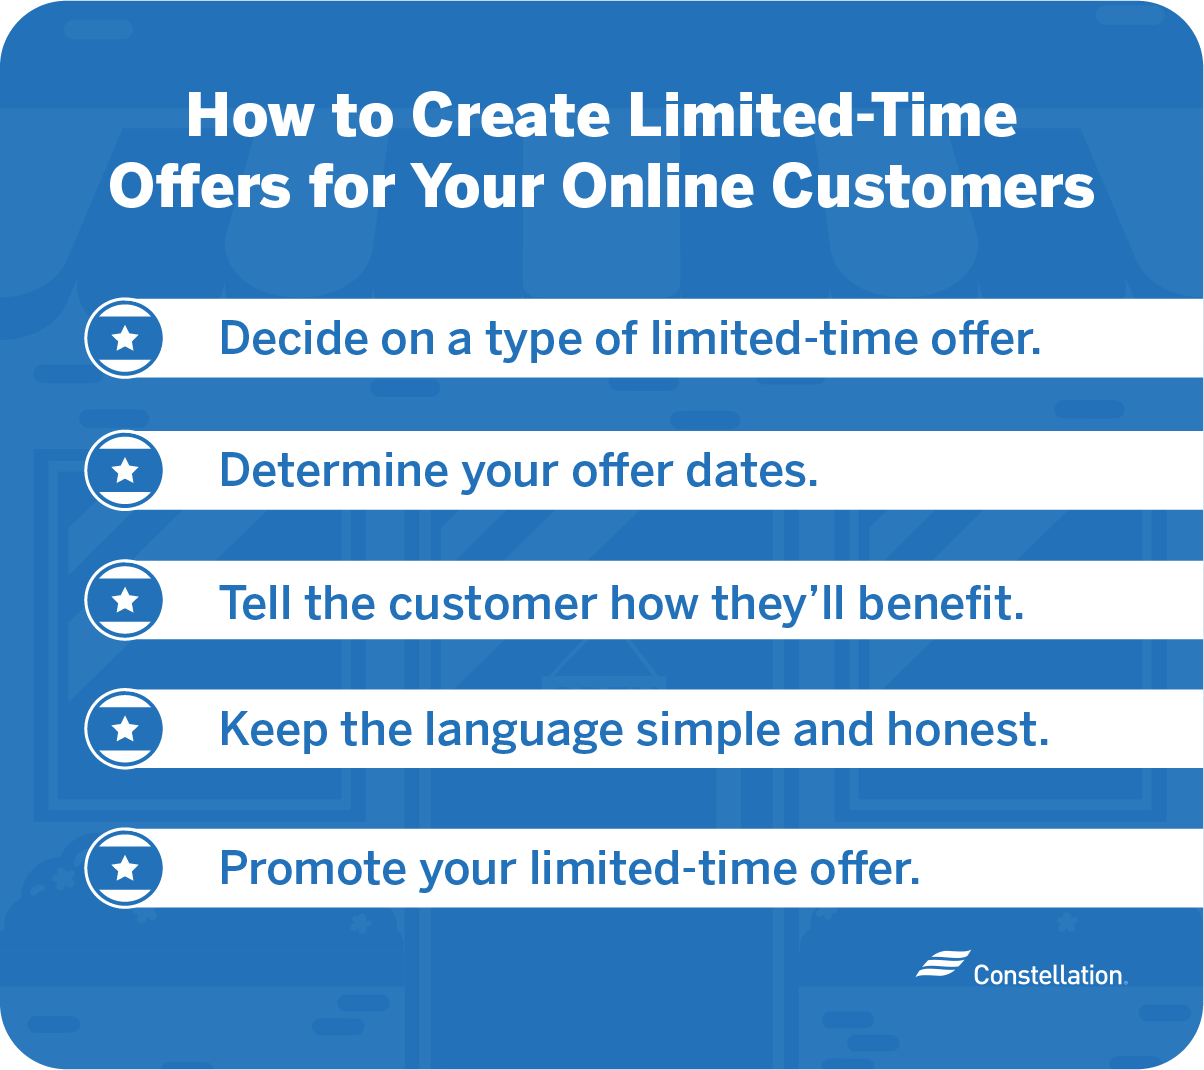 Creating limited-time offers for your online customers